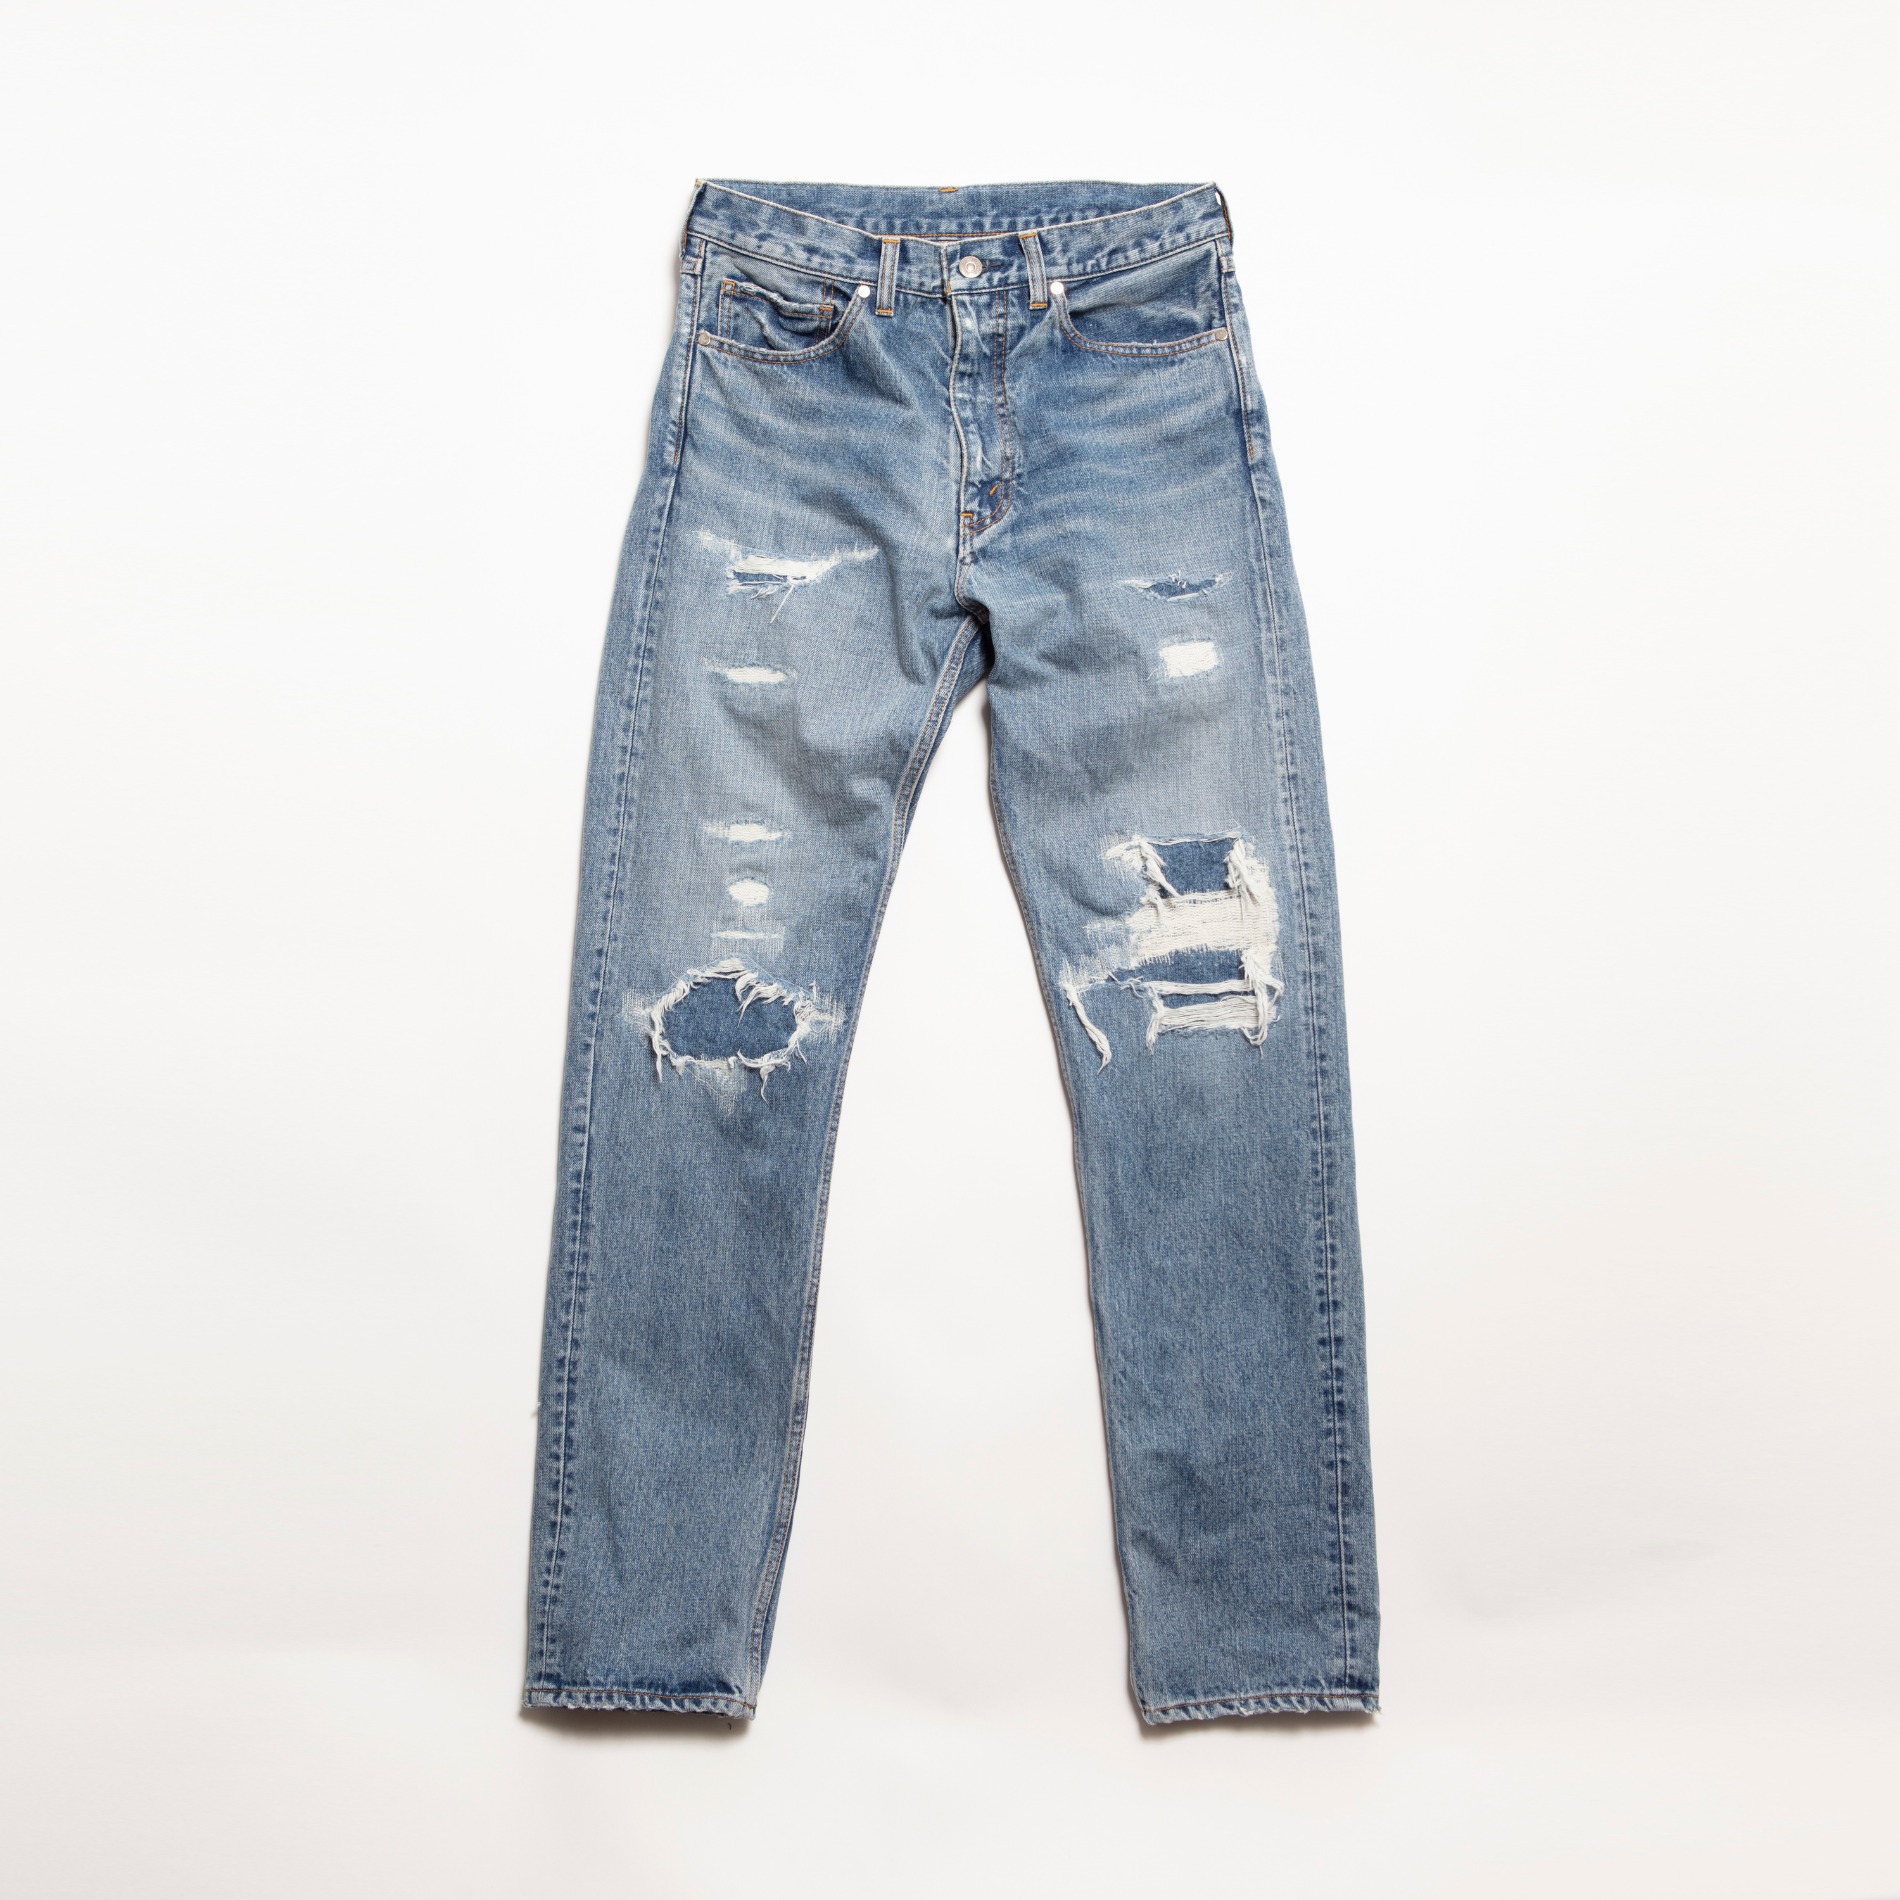 AW21 THE LETTERS 5 POCKETS GRUNGE TAPERED PANTS USED WASHED DENIM INDIGO